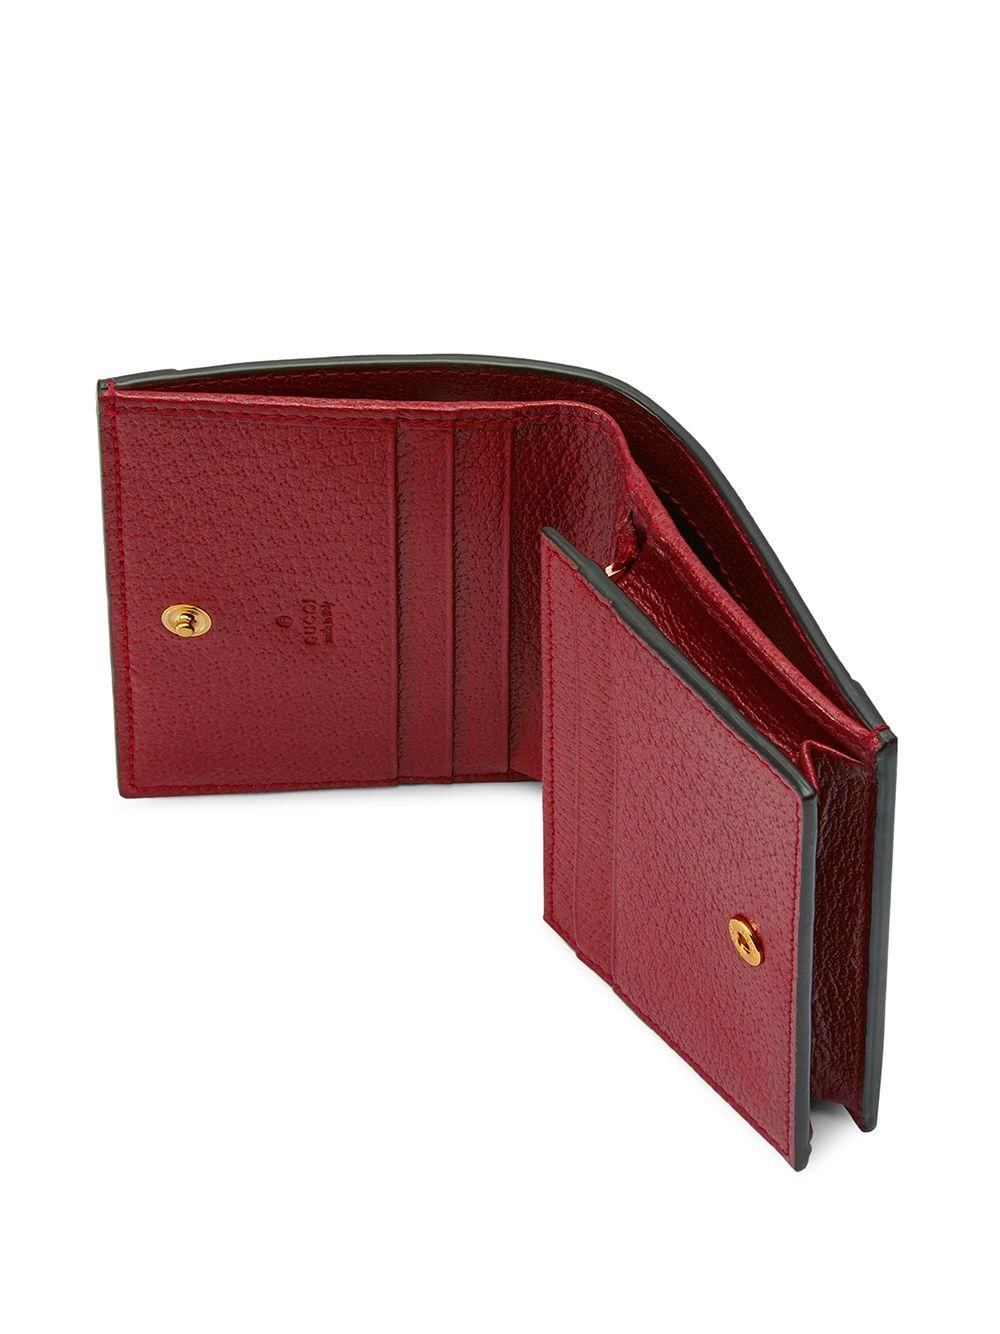 BRAND NEW AUTHENTIC Gucci GG Ophidia Flora Red Bifold Wallet - FREE  SHIPPING £433.18 - PicClick UK